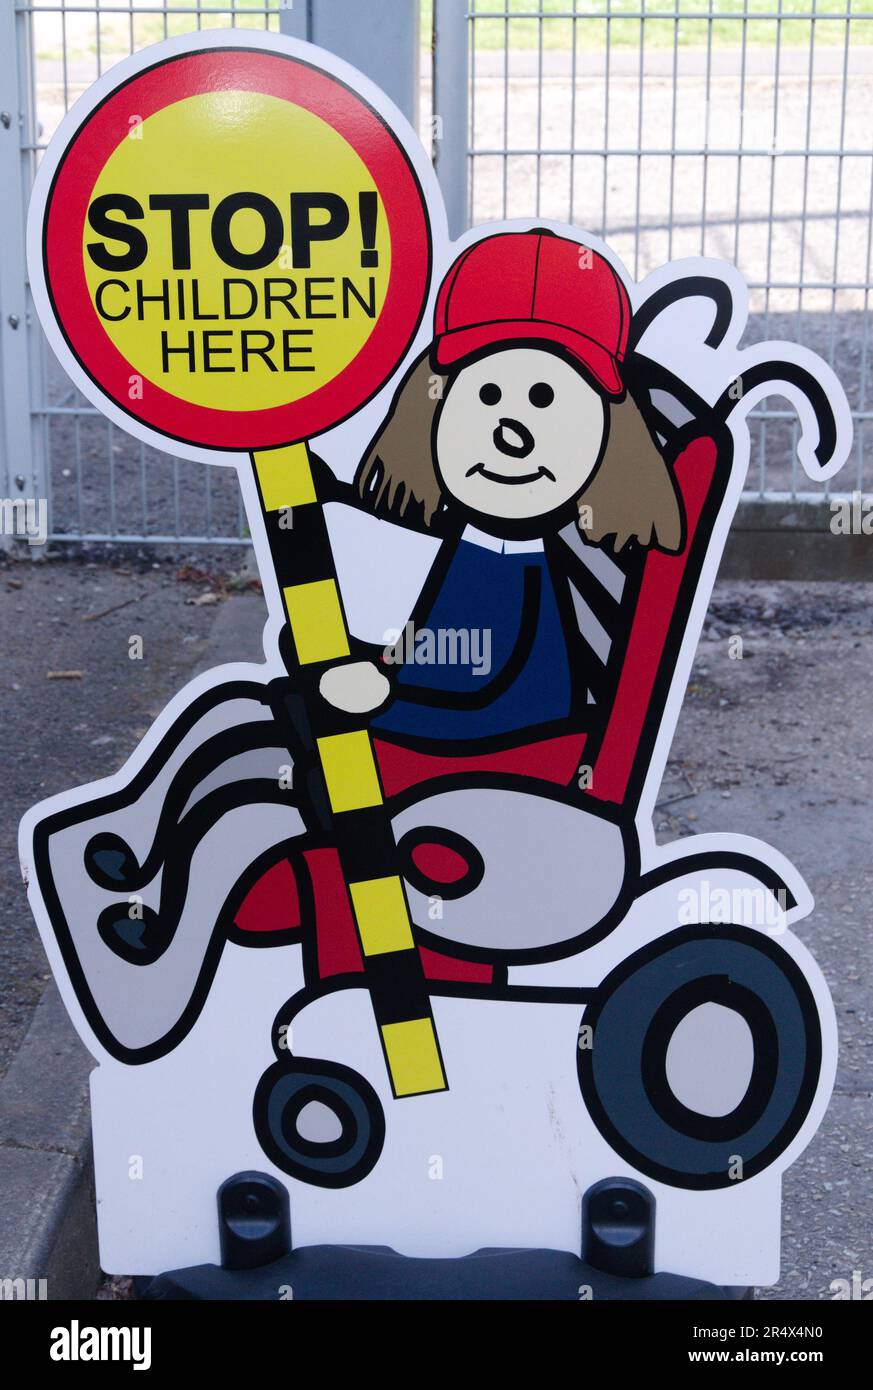 Image of a child with a 'stop! children here' message outside a school in Manchester, UK, safety, advice to drivers, driving safely Stock Photo